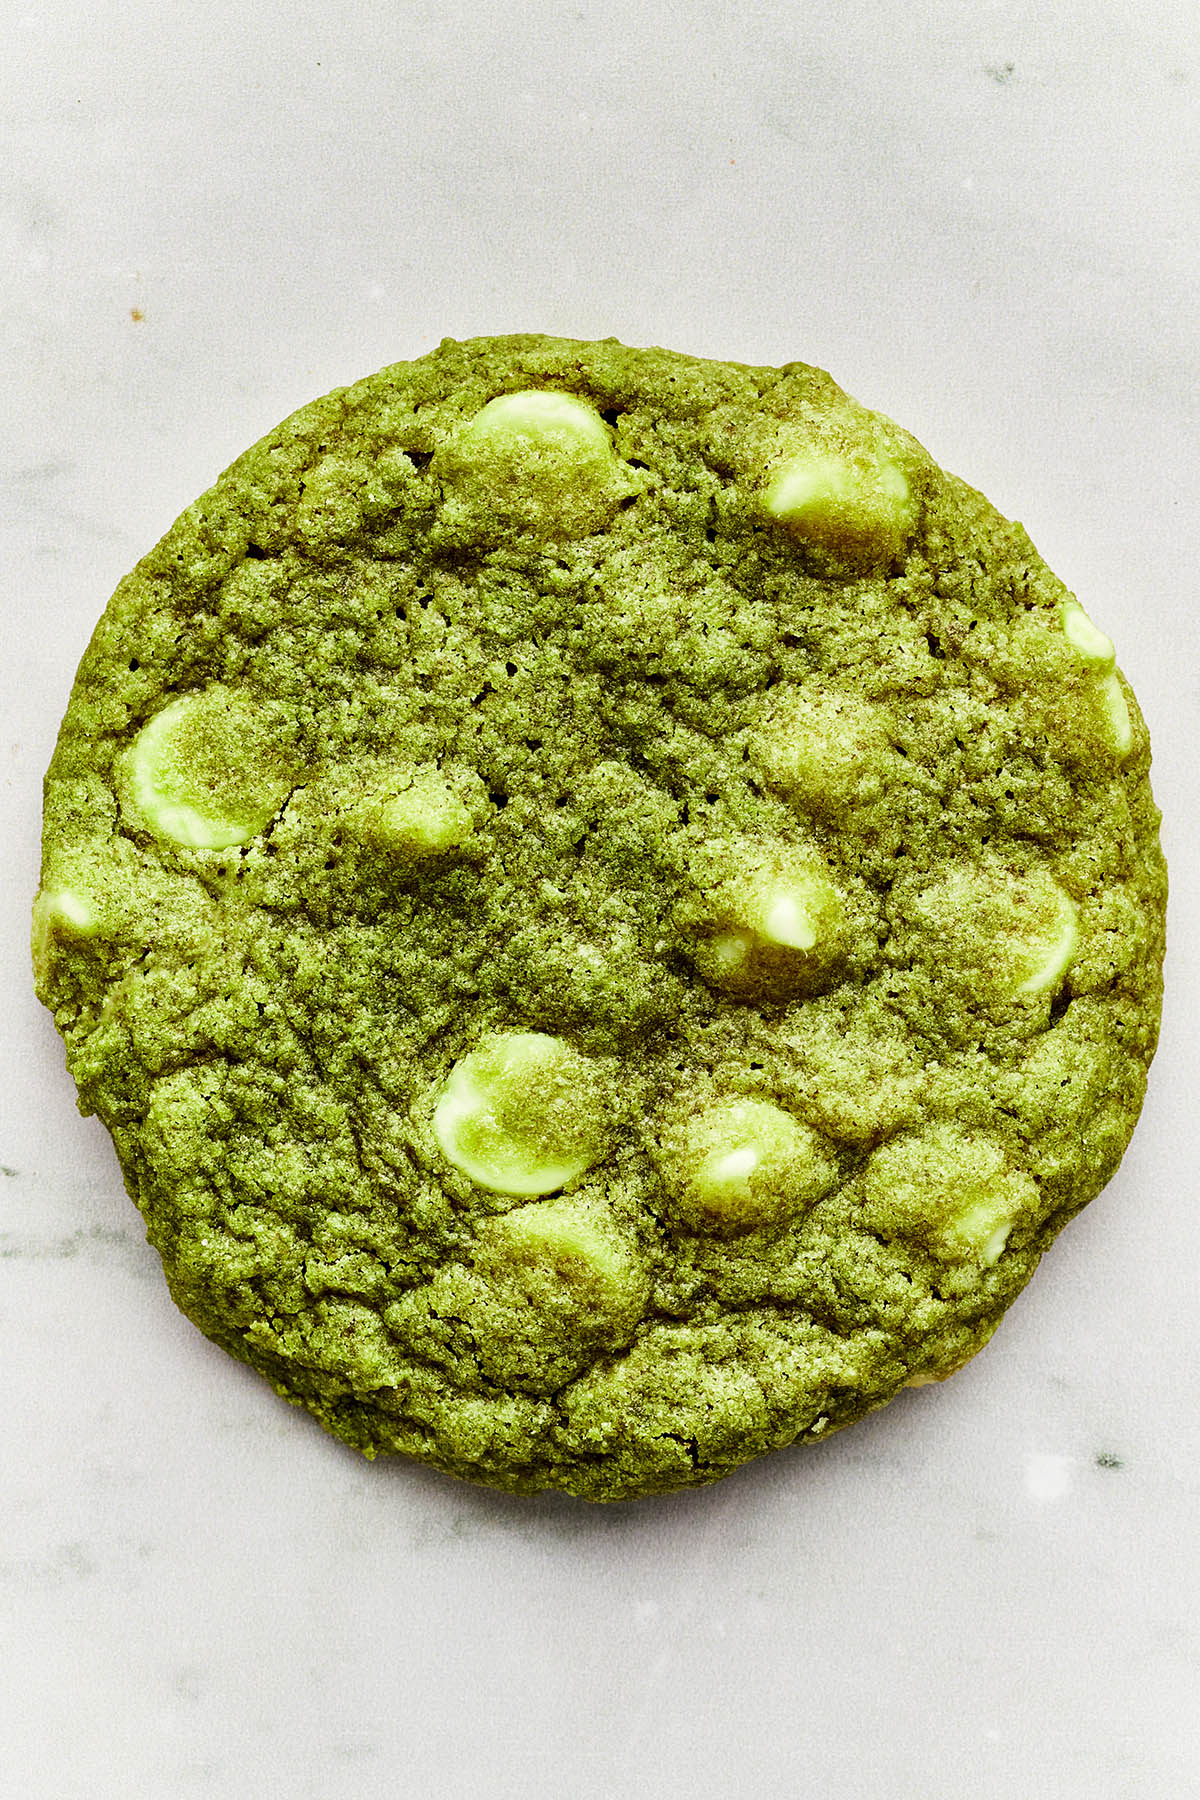 Close up overhead full frame image of one green tea cookie.